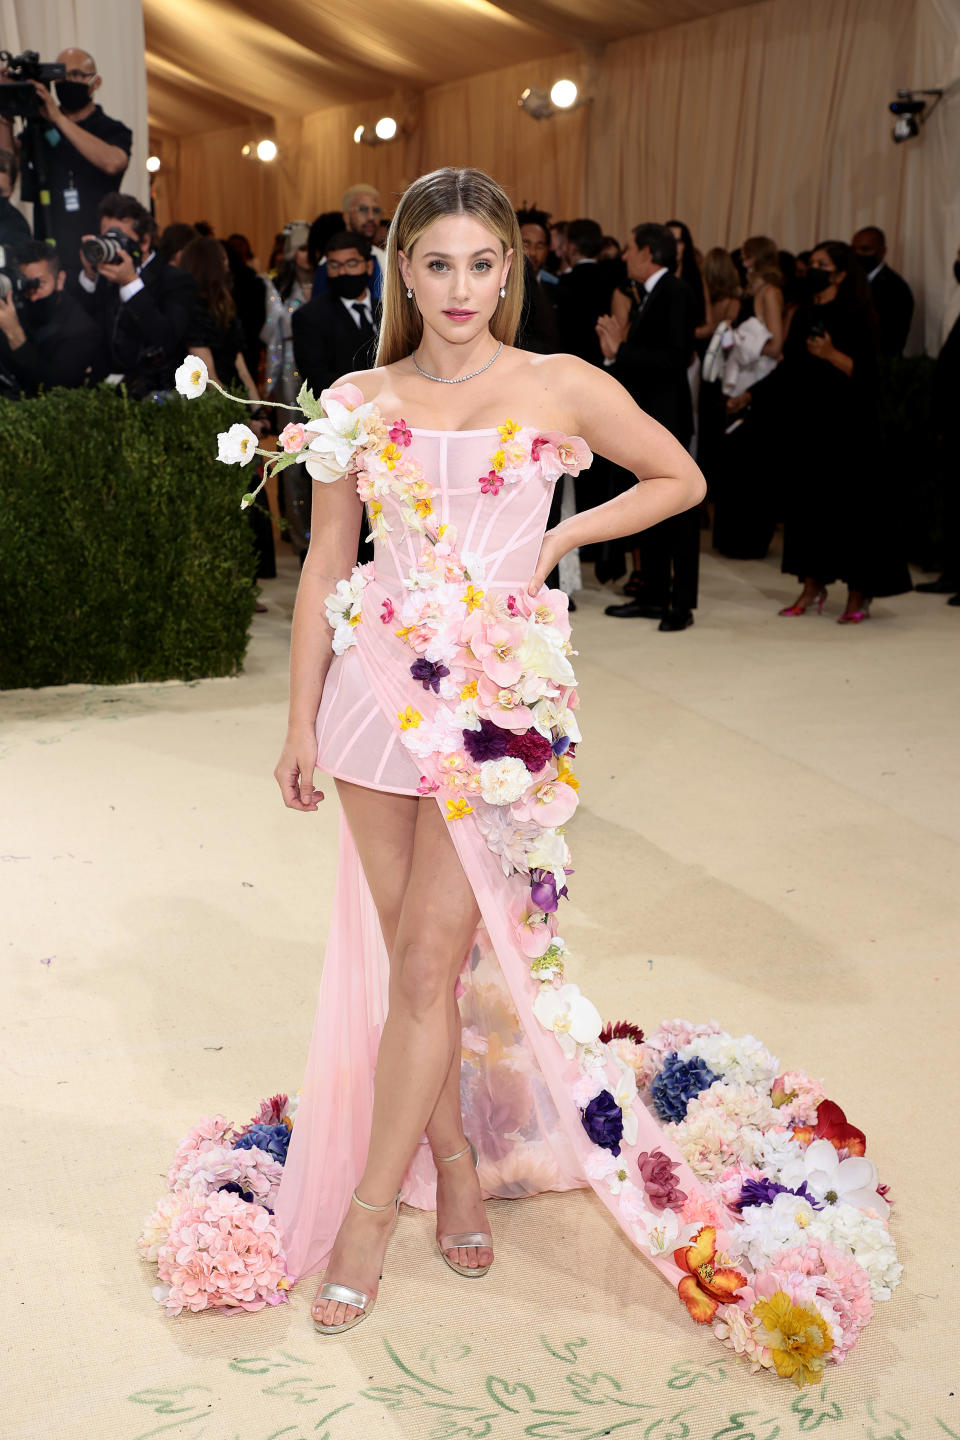 <p> Lili Reinhart&apos;s Christian Siriano gown was a floral dream! The dress was sheer, millennial pink and covered in vibrant flowers, right down to the trailing train. This dress was by far one of the prettiest ever to walk the red carpet. </p>